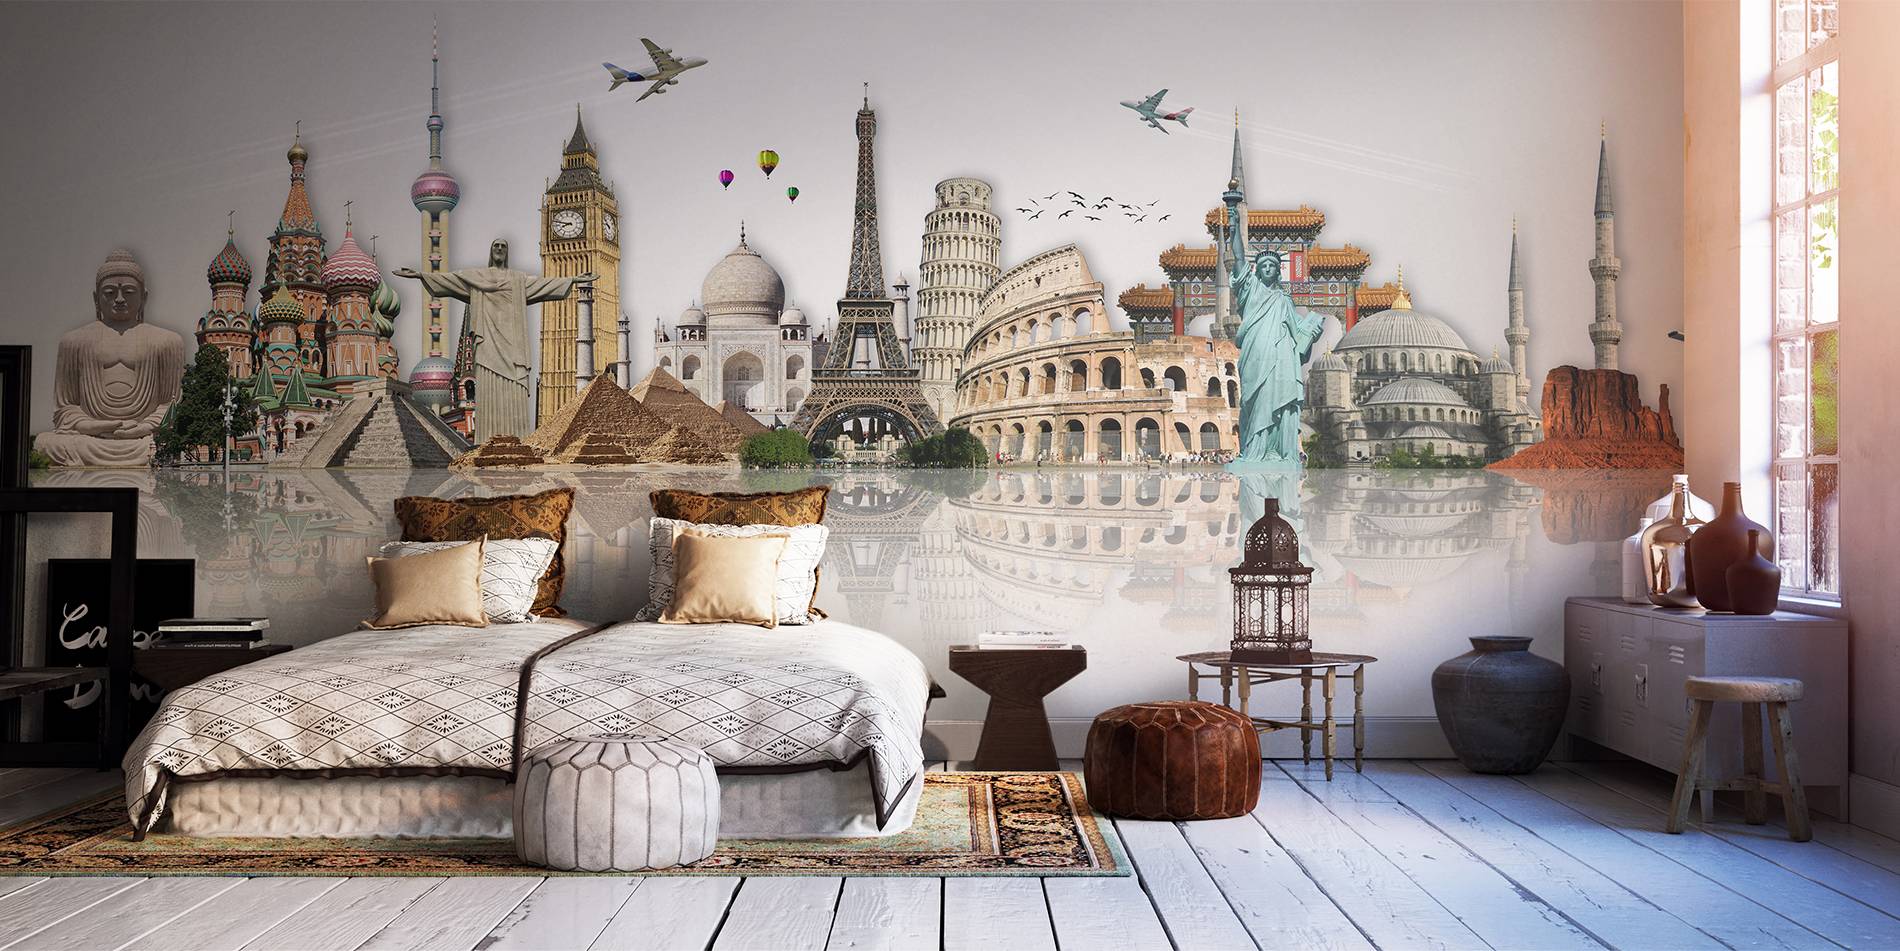 Dreams of traveller • Contemporary - Bedroom - Architecture and buildings - Wall Murals - Posters